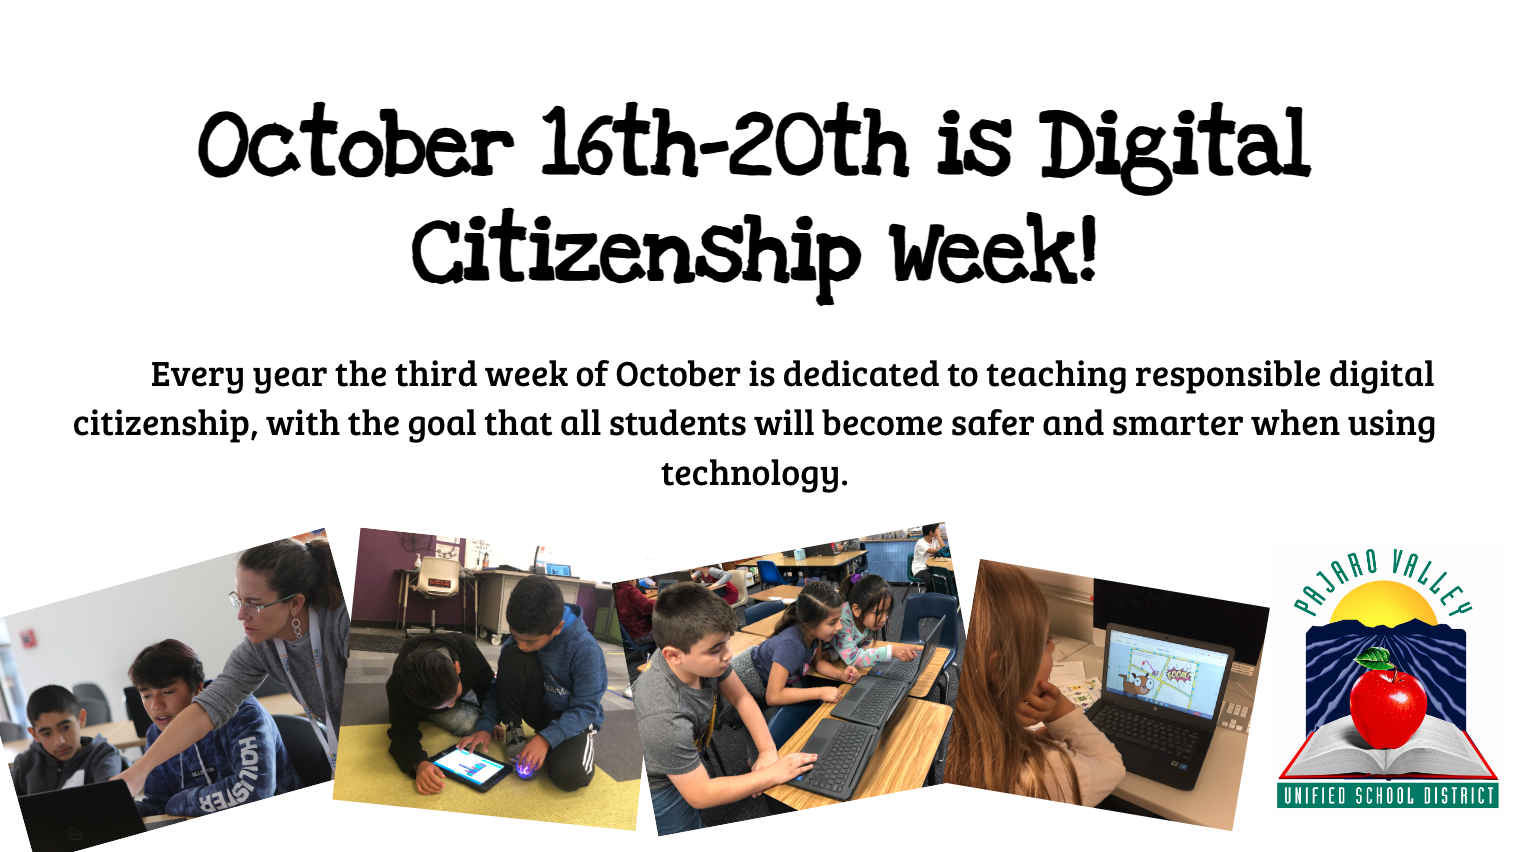 Digital Citizenship Week is October 16th-20th.